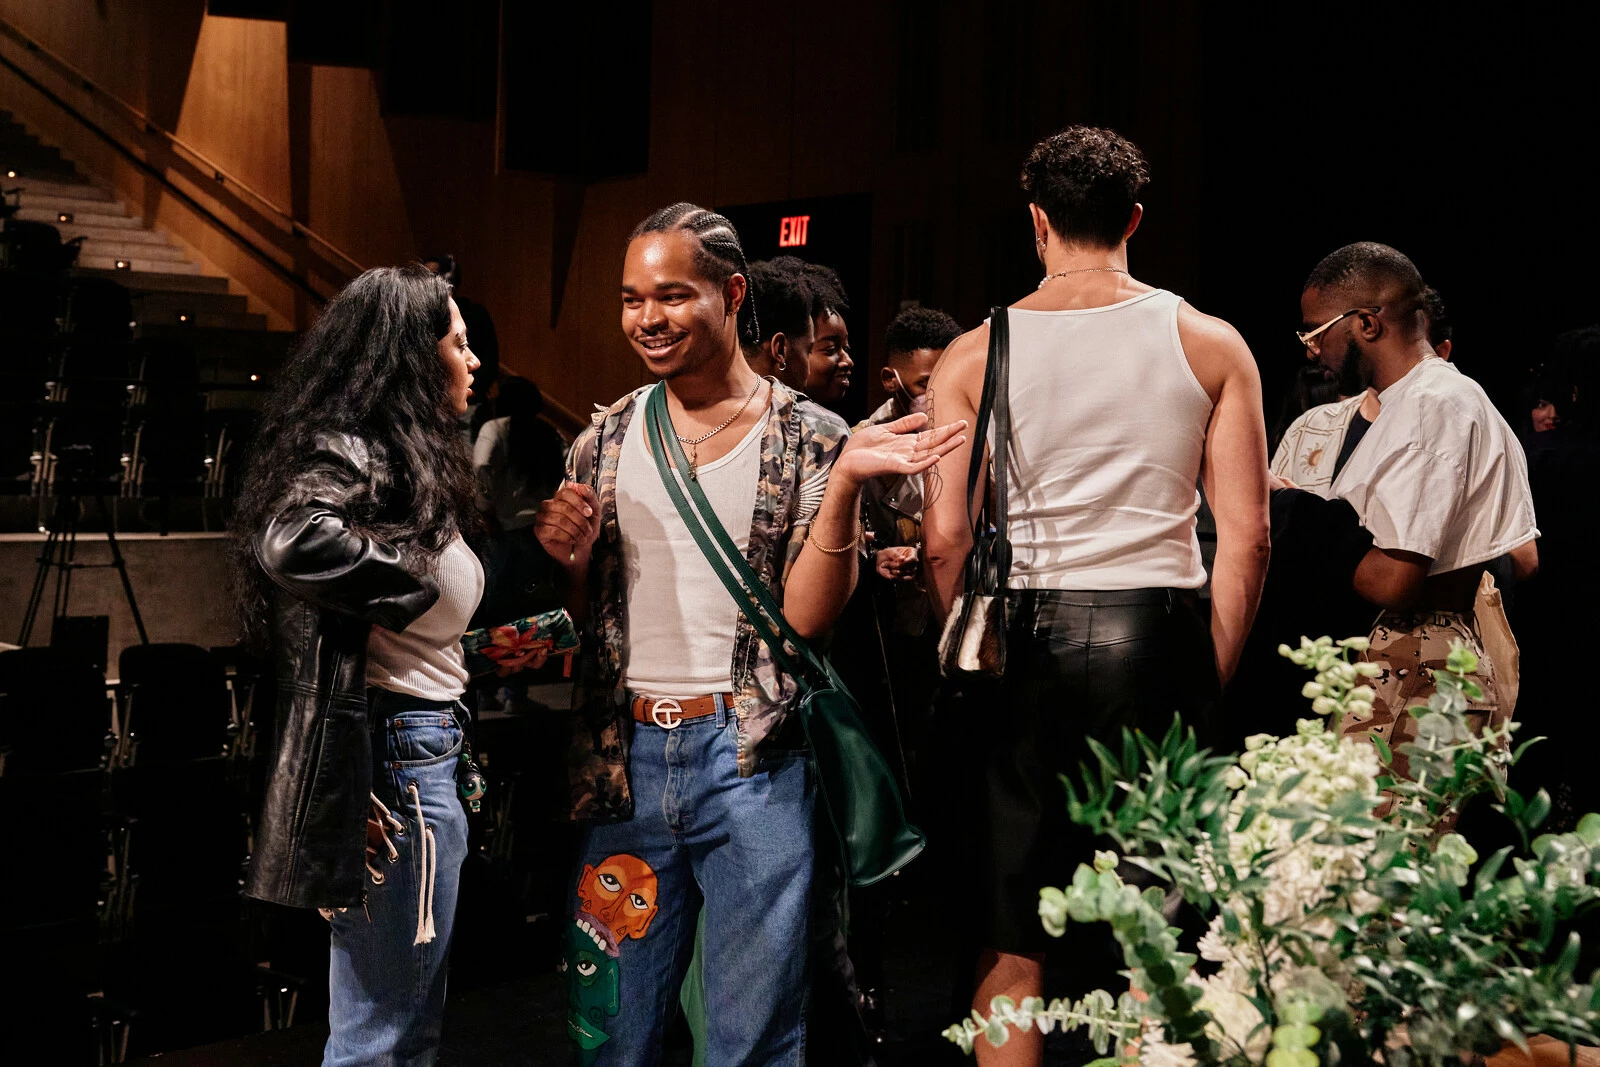 Five people gather on stage wearing leather jackets, white tank tops, and blue jeans.